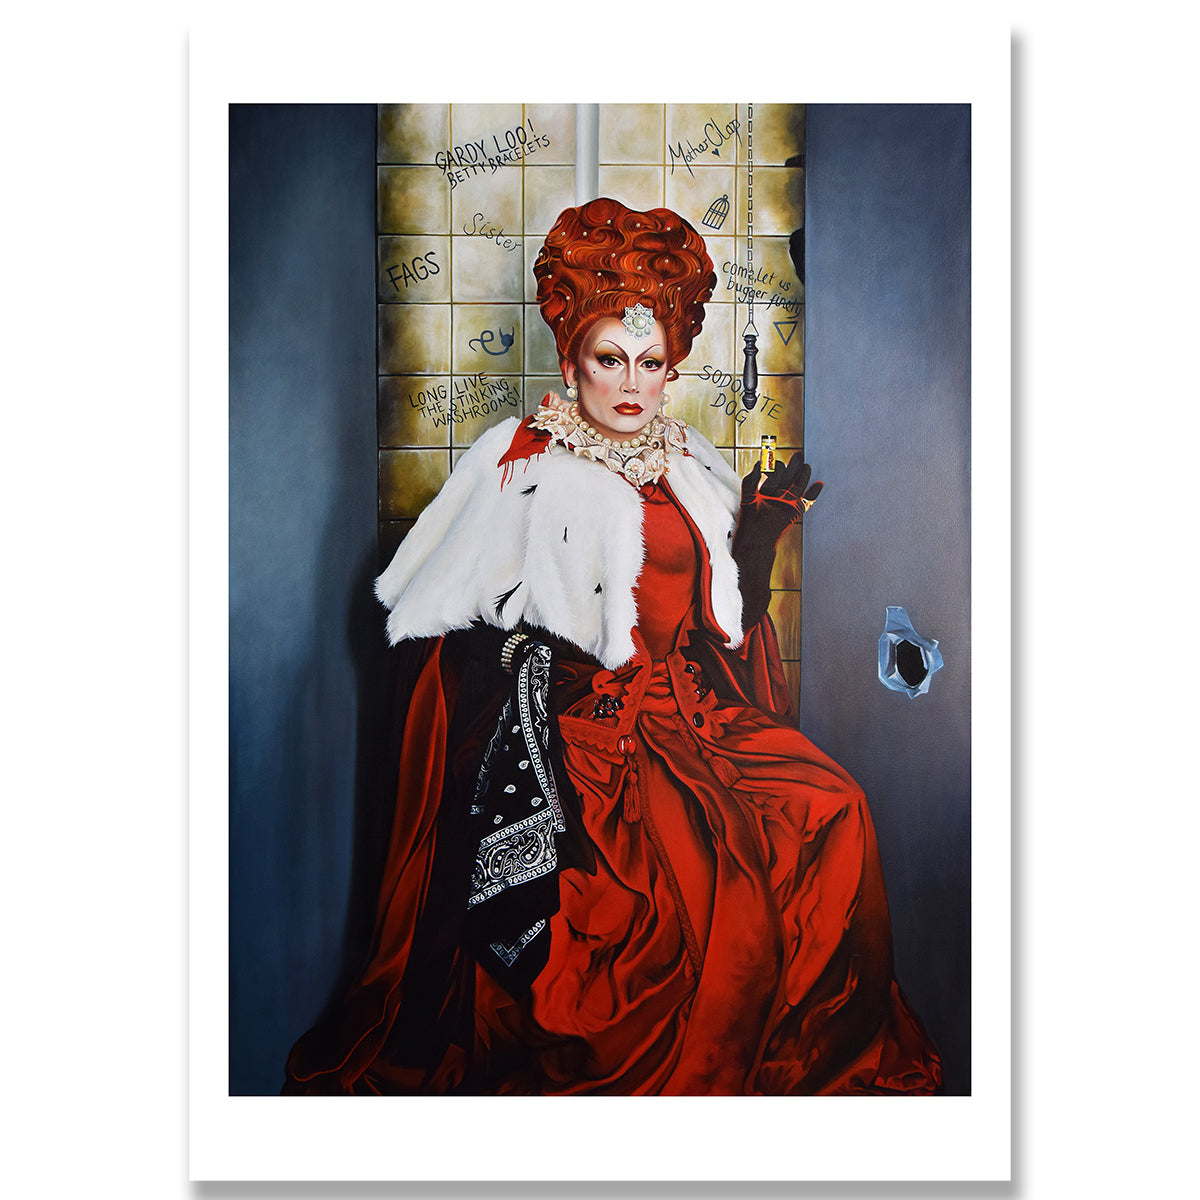 Cottage Queen by Johnny Humes - signed limited edition archival Giclée print